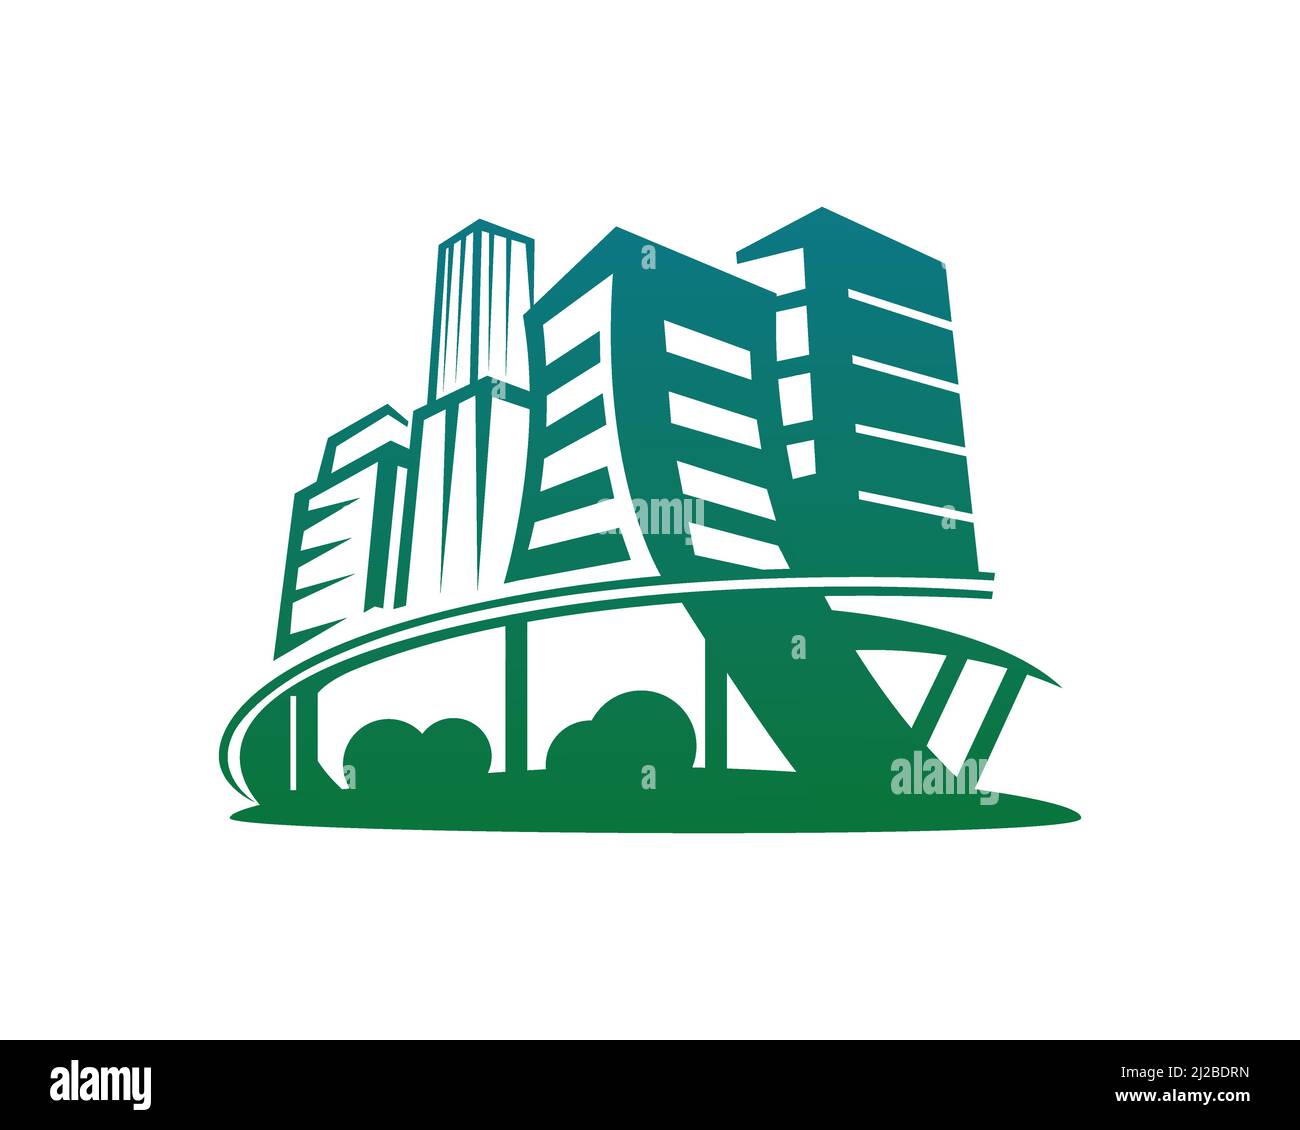 City Life and Building Illustration Stock Vector